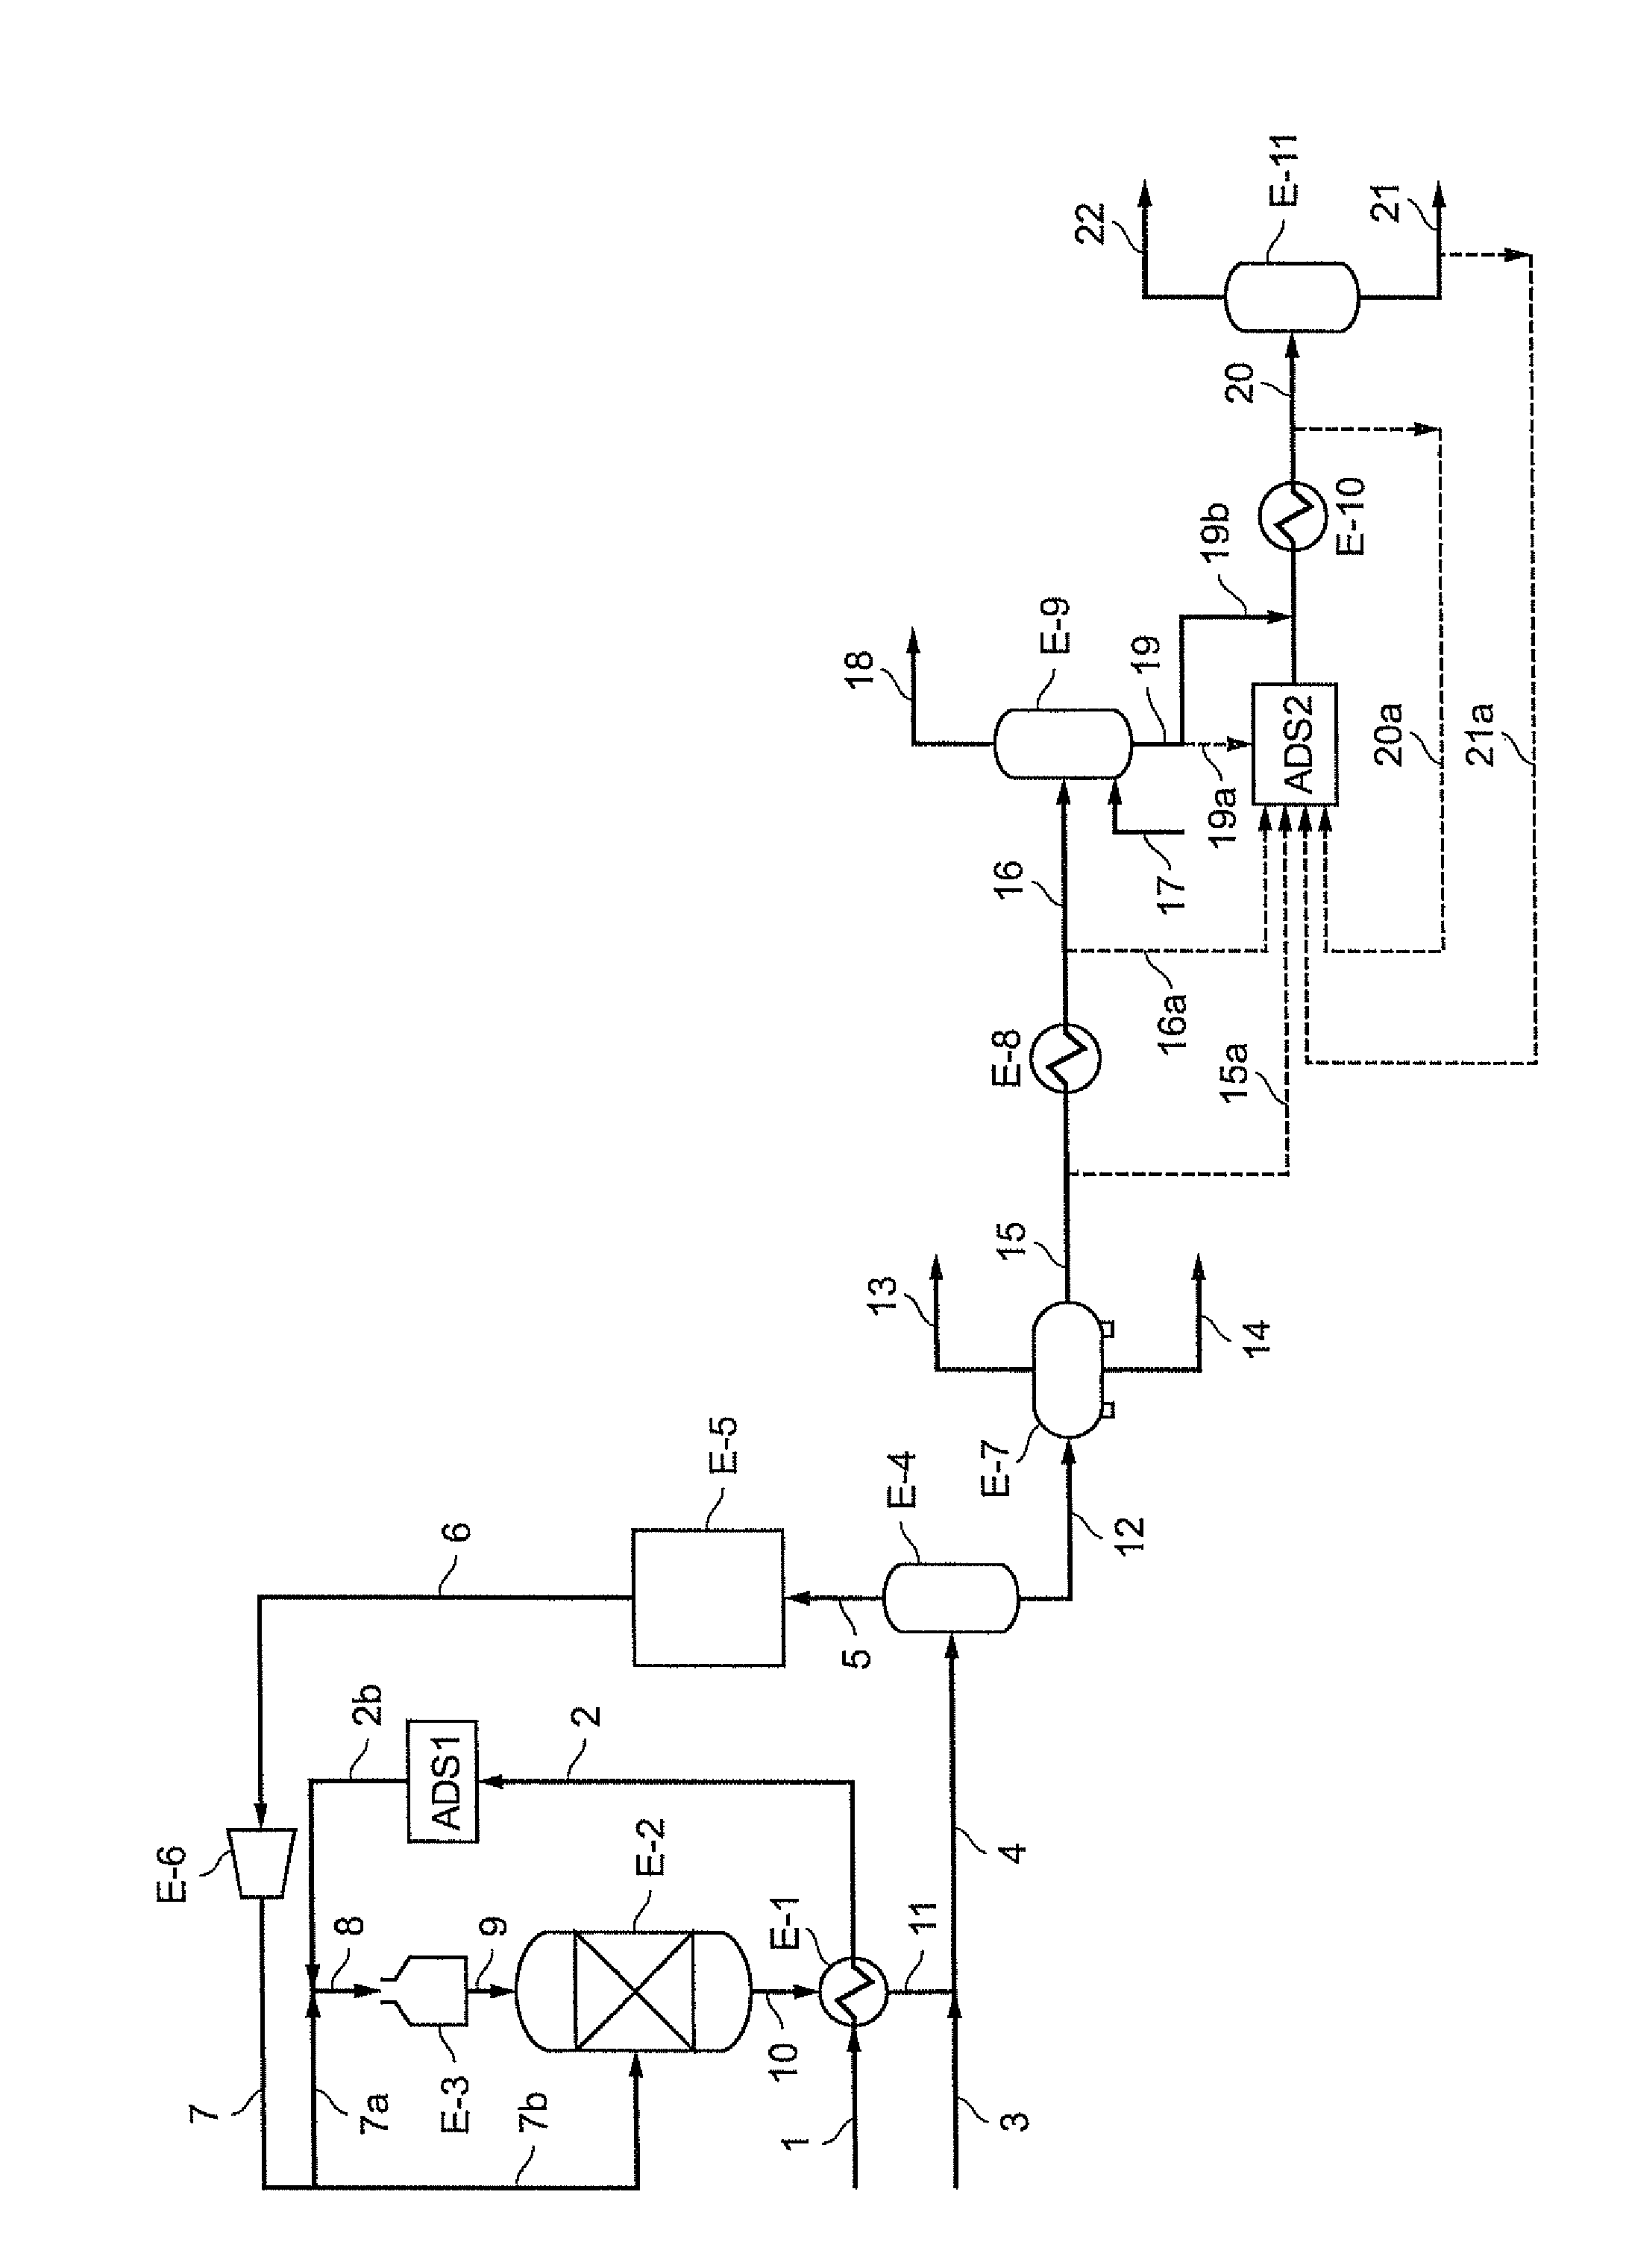 Process for desulfurization and denitration of a gas-oil-type hydrocarbon fraction that contains nitrogen compounds